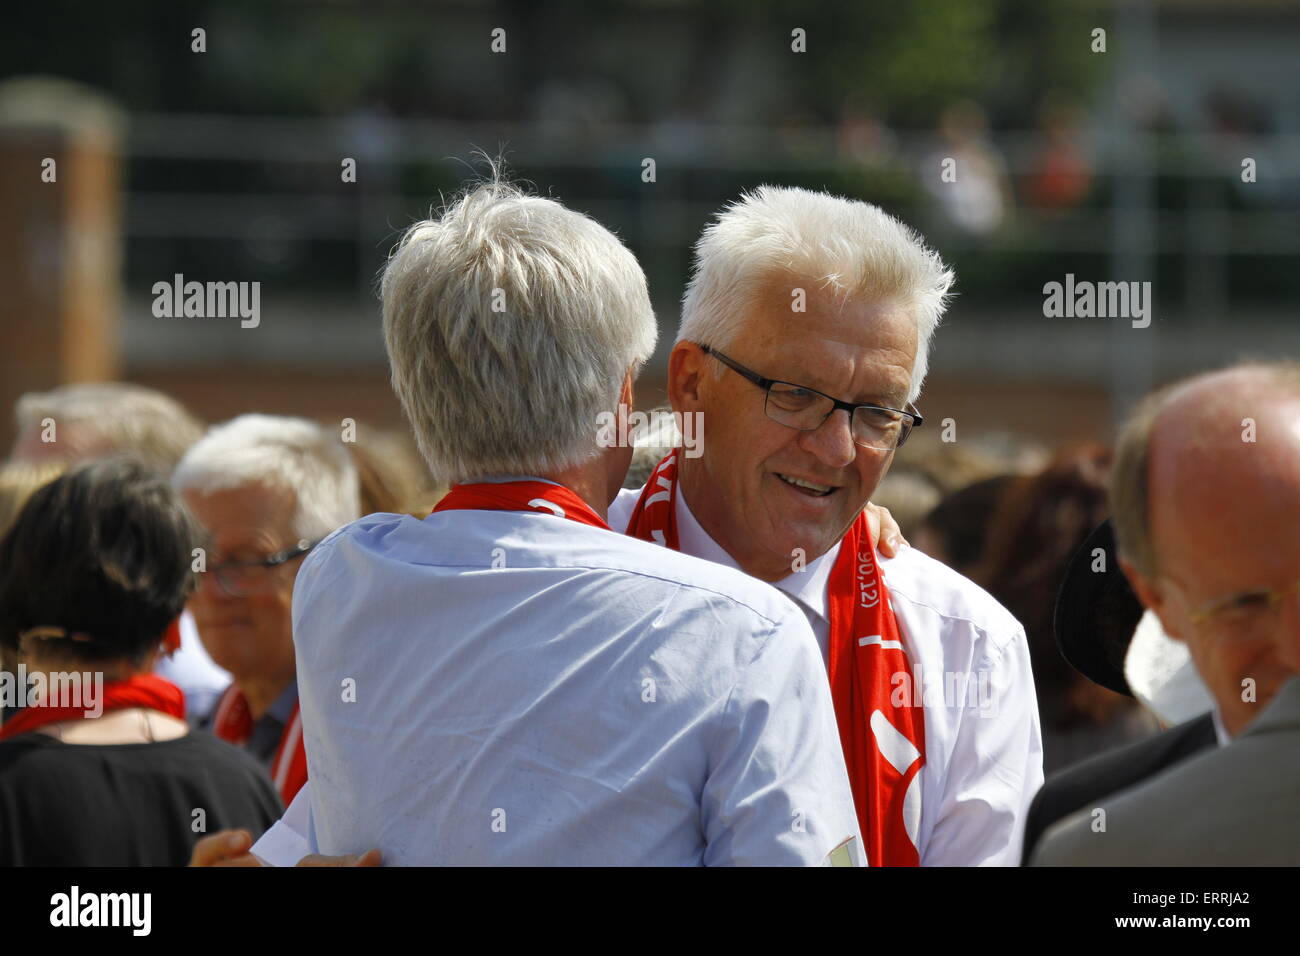 Stuttgart, Germany. 07th June, 2015. Heinrich Bedford-Strohm (left), the Chairman of the Council of the EKD (Evangelical Church in Germany), hugs Winfried Kretschmann, the Minister-President of Baden-Württemberg, at the closing ceremony of the 35th German Protestant Church Congress. © Michael Debets/Pacific Press/Alamy Live News Stock Photo